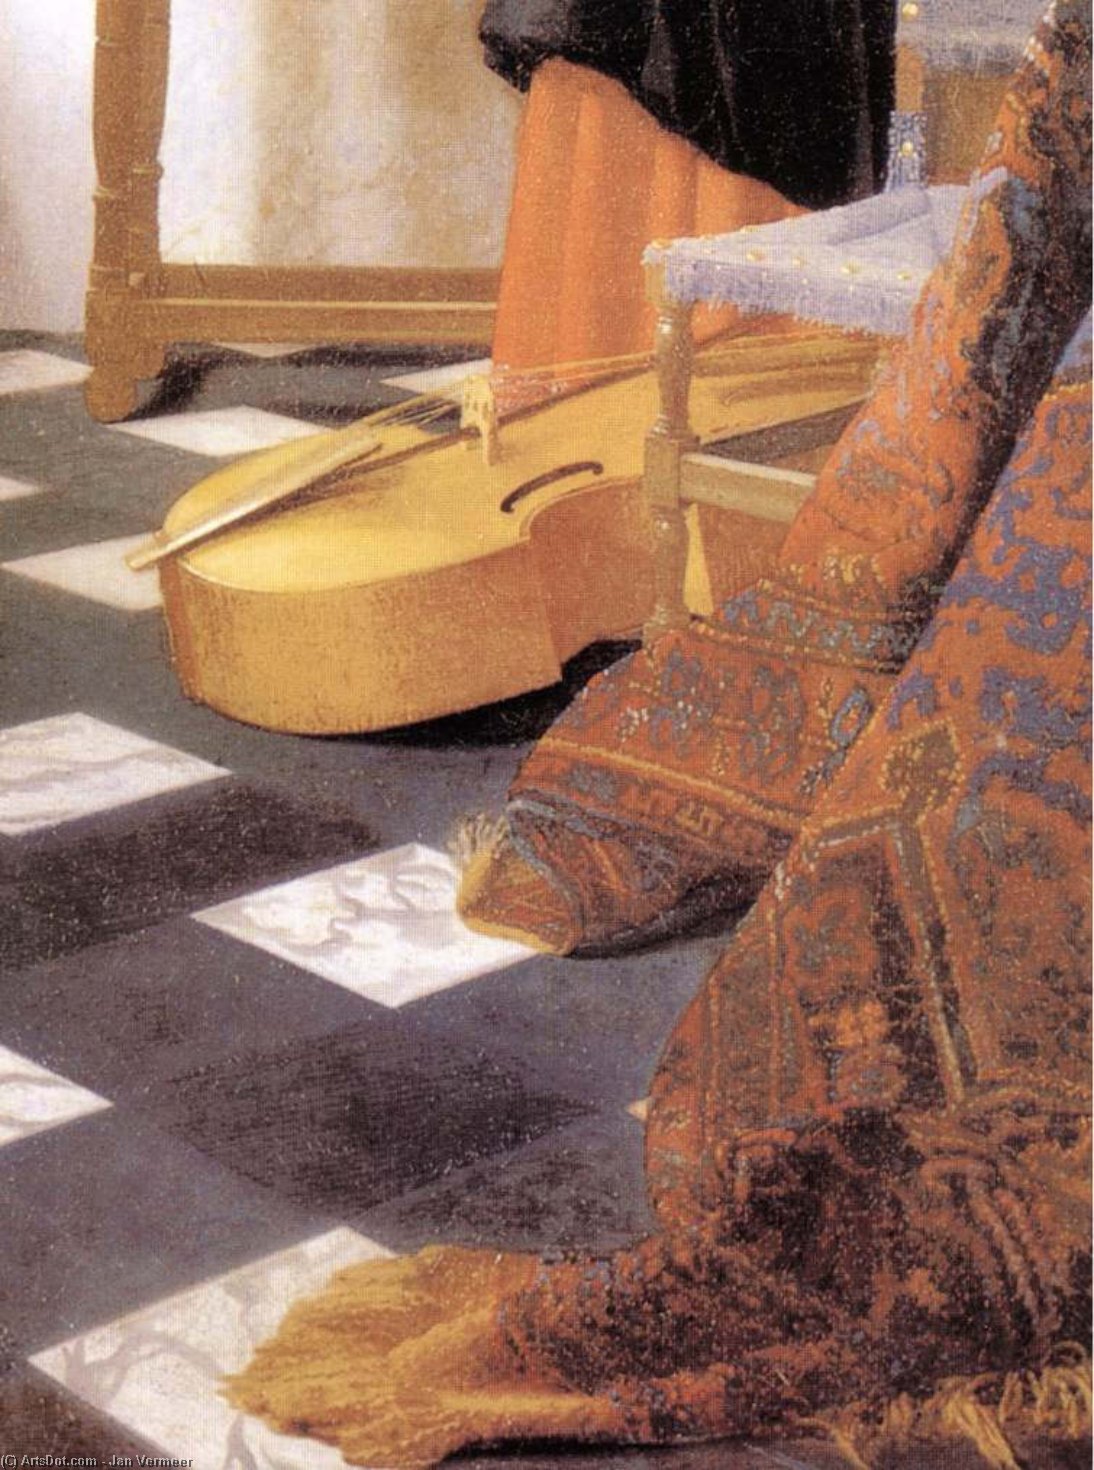 WikiOO.org - Encyclopedia of Fine Arts - Lukisan, Artwork Jan Vermeer - A Lady at the Virginals with a Gentleman (detail)